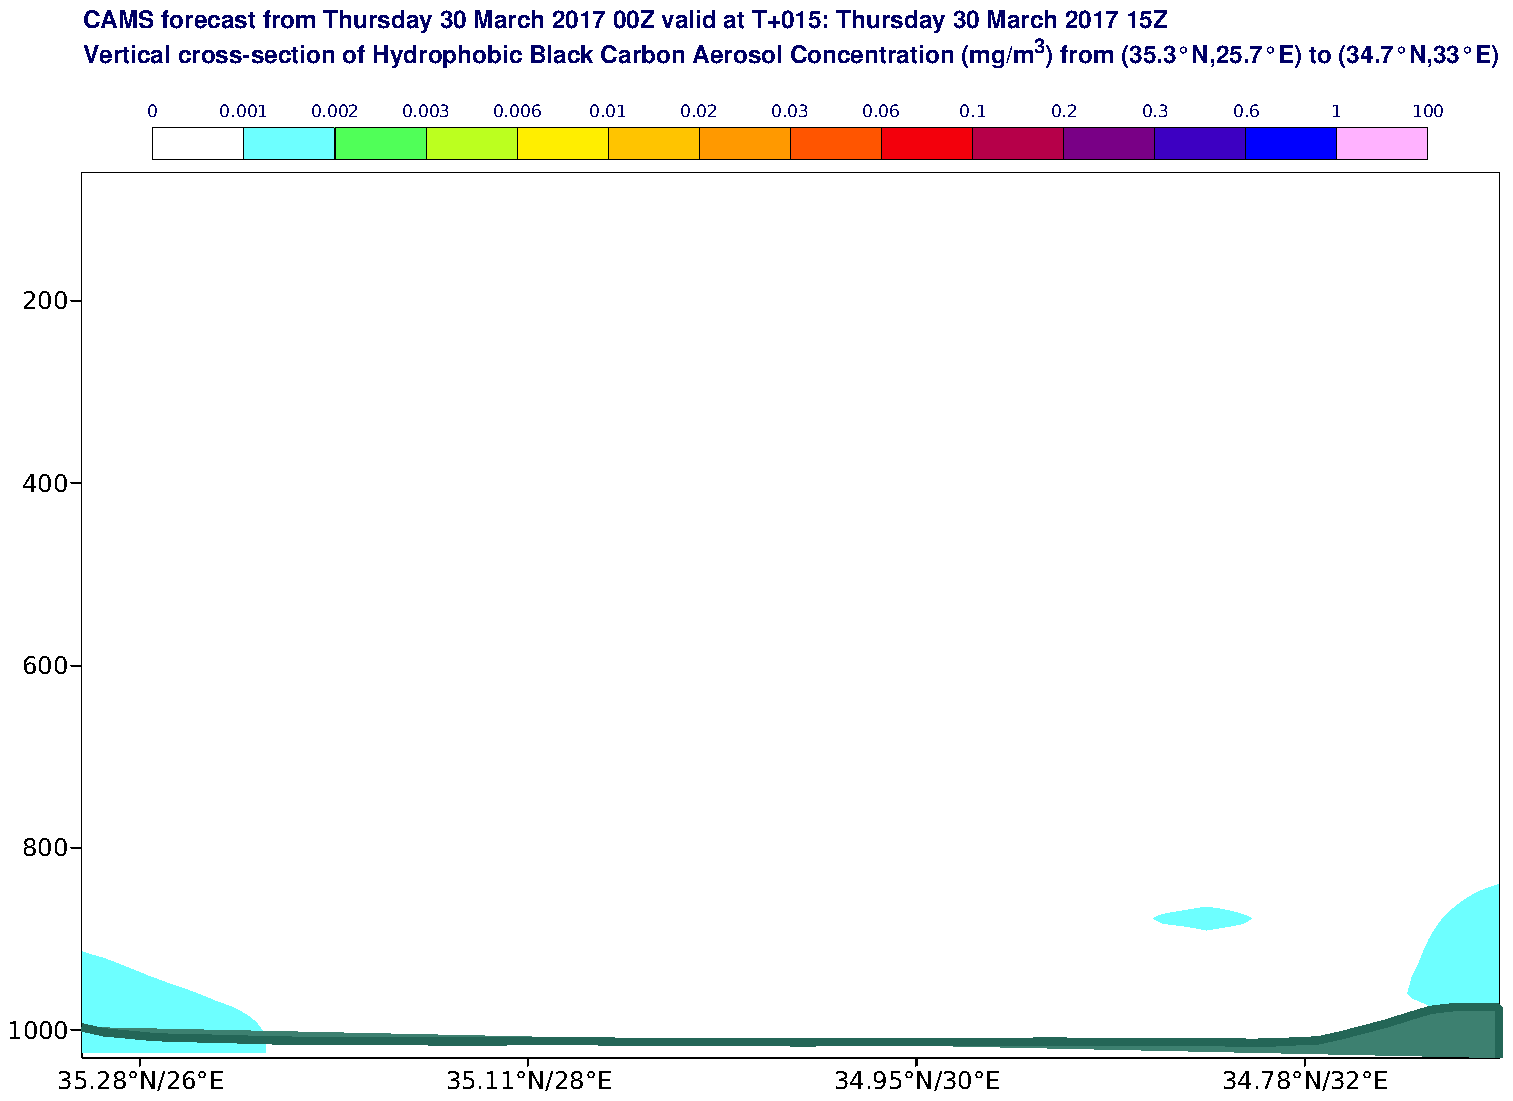 Vertical cross-section of Hydrophobic Black Carbon Aerosol Concentration (mg/m3) valid at T15 - 2017-03-30 15:00